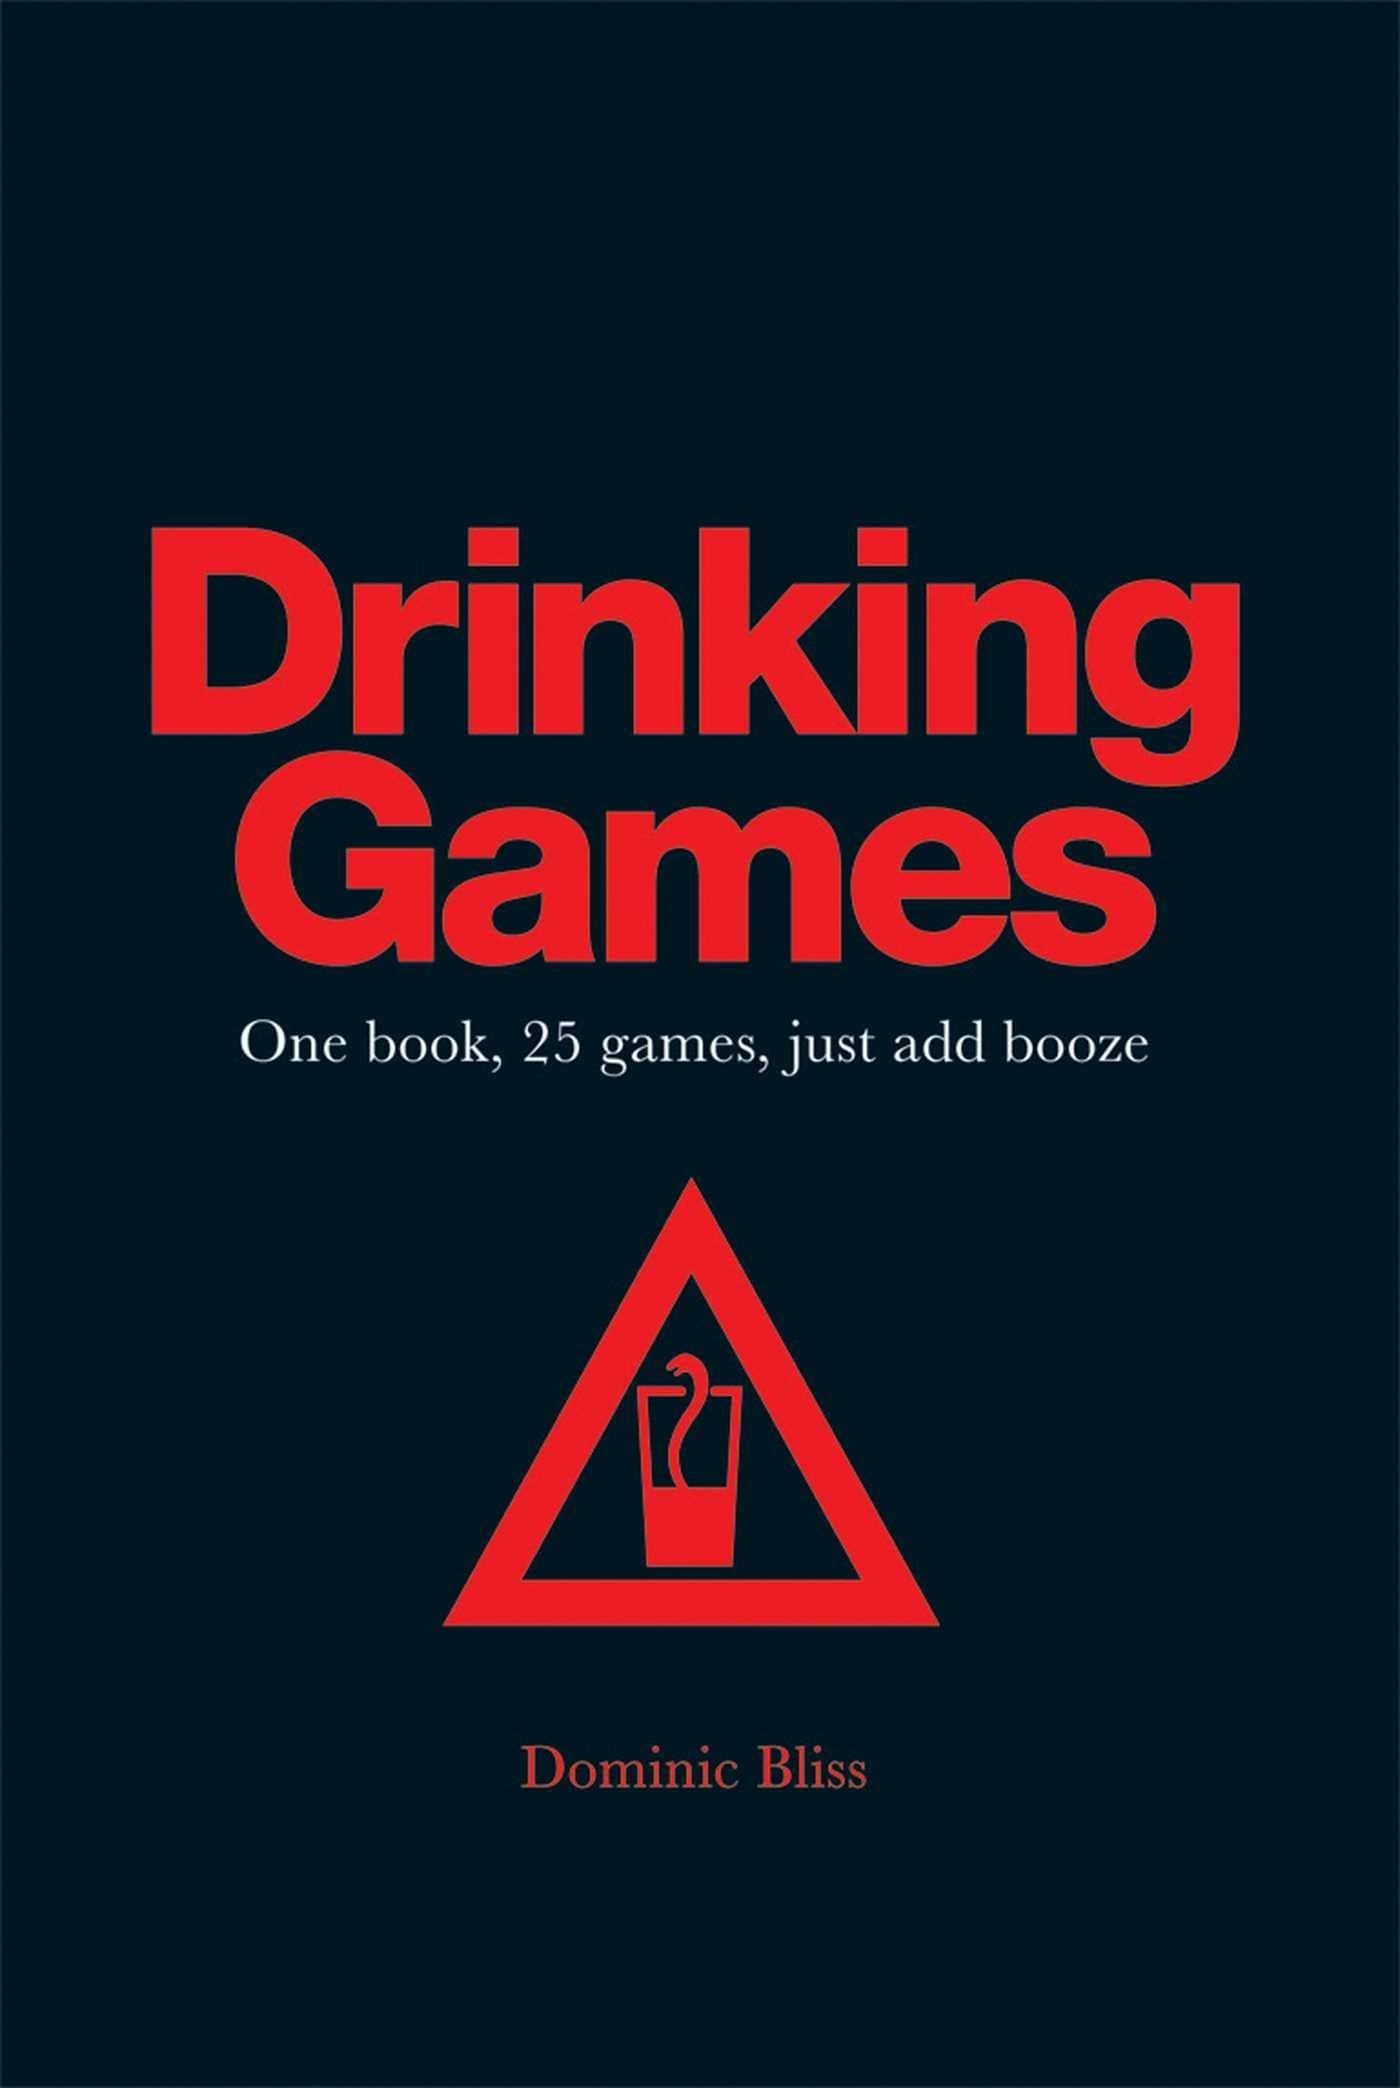 DRINKING GAMES: ONE BOOK 25 GAMES JUST ADD BOOZE